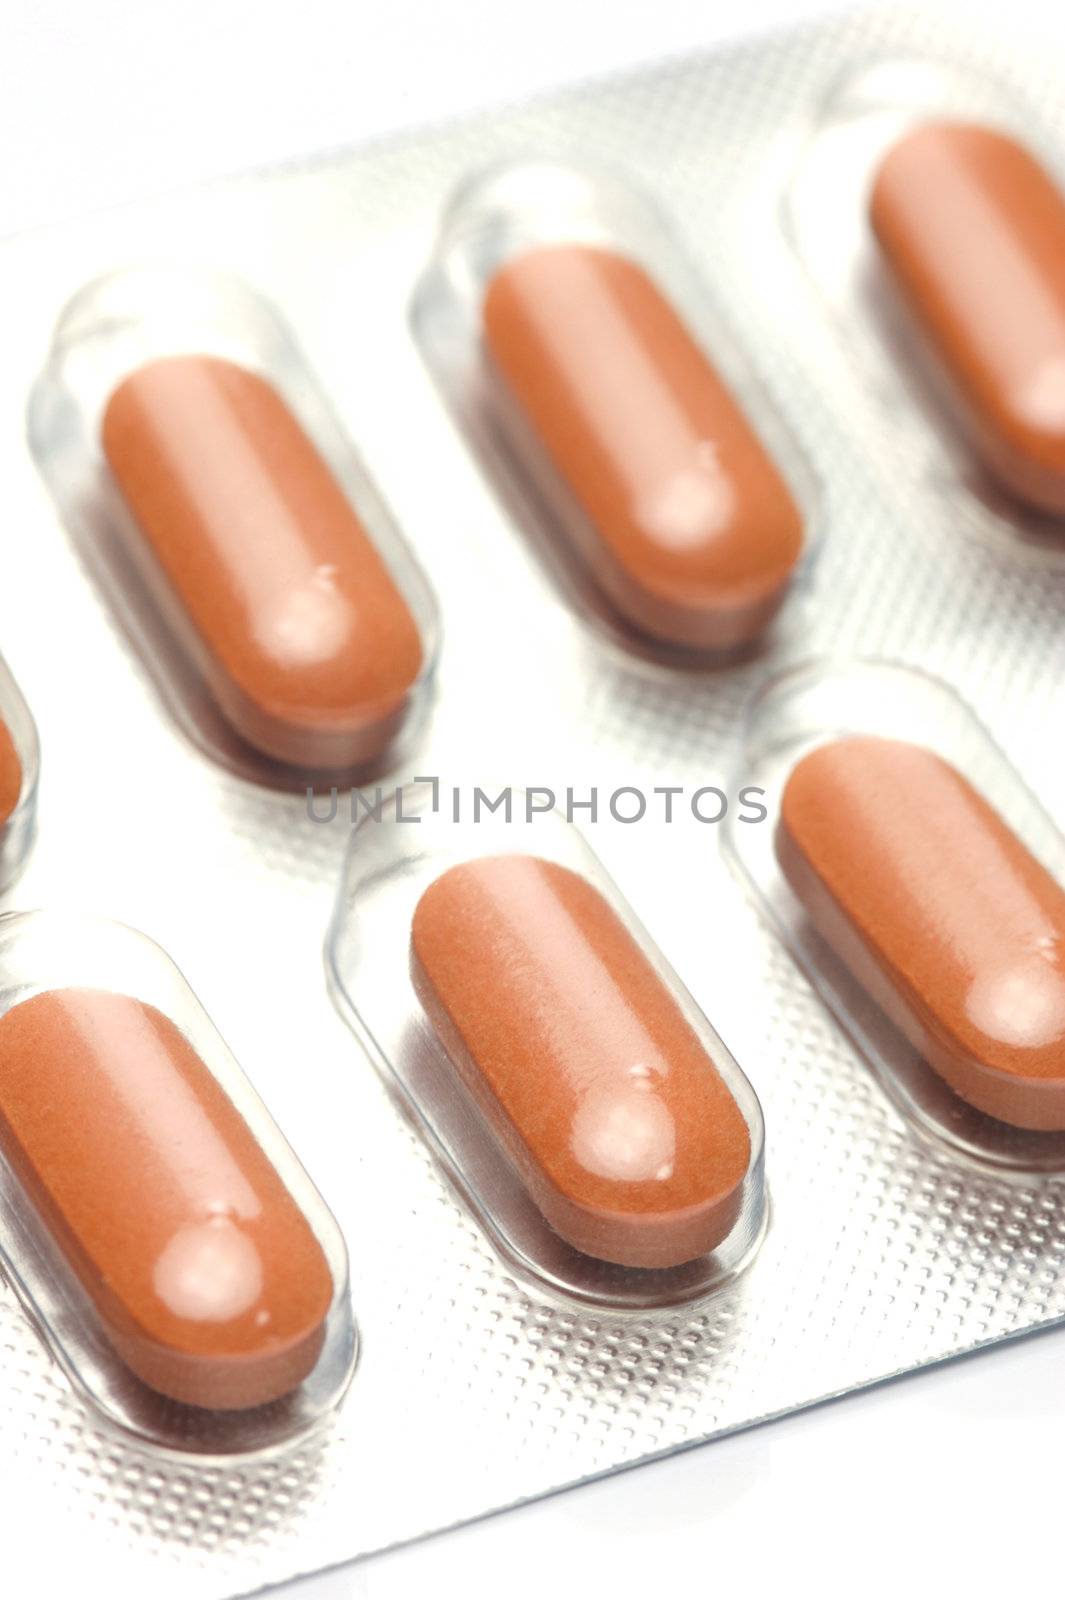 Prescription tablets isolated against a white background